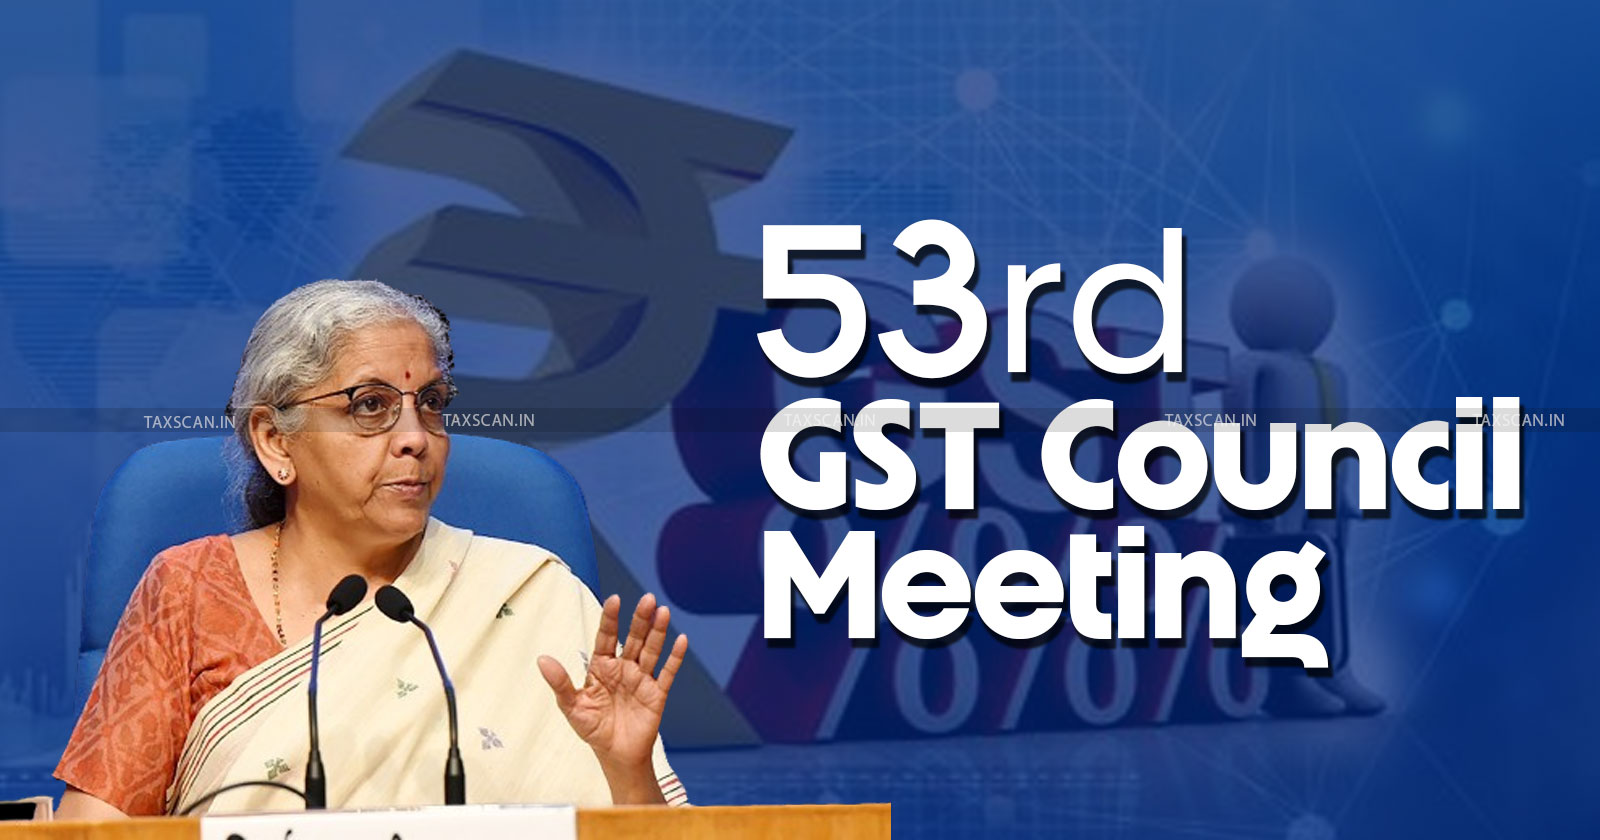 GST Council At 53rd Meeting Decides To Roll Out Pan-India Biometric Authentication To Check Fake Invoicing